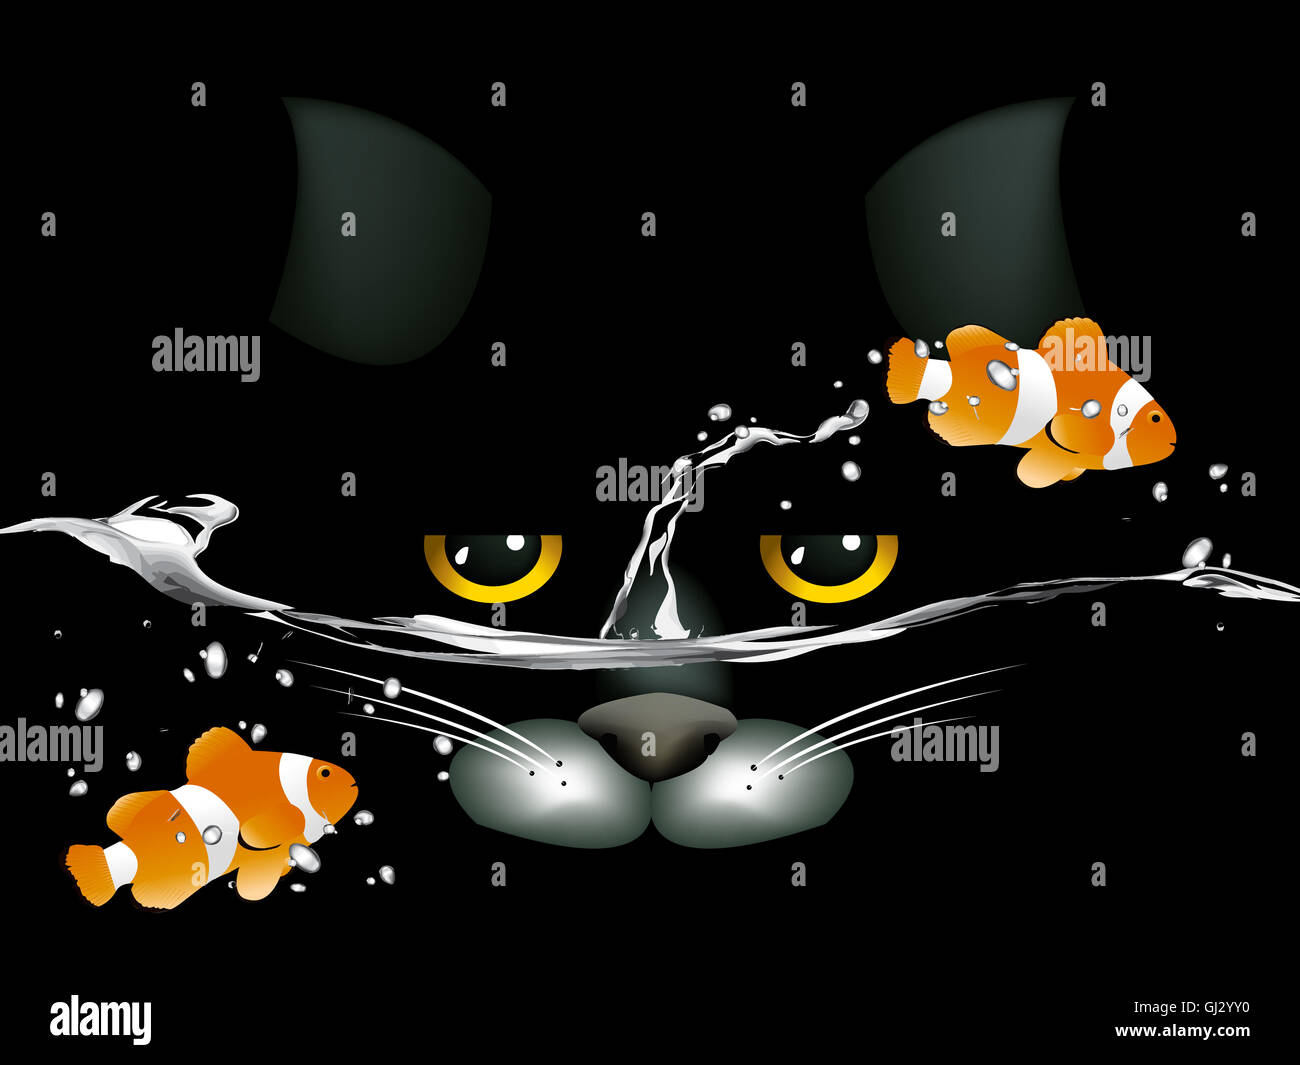 black cat looking at two clown fish Stock Photo